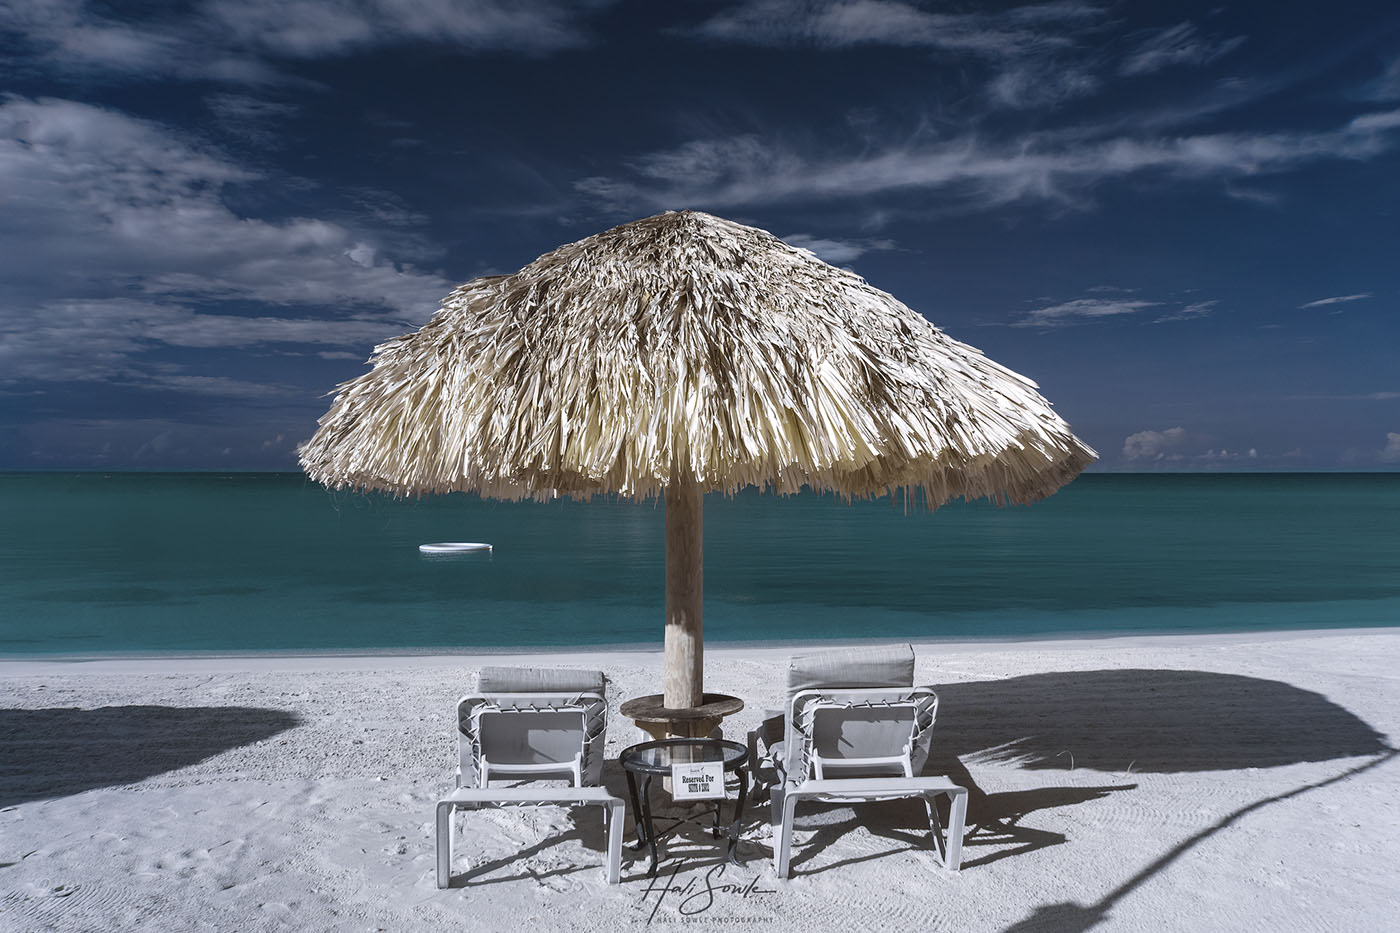 2019_09_Sandals-SouthCoast-10947-Edit1000.jpg - Faux color infrared of the beach and chairs.  We took a long morning walk after breakfast the morning we were leaving.  As always it was hard to leave this wonderful resort.